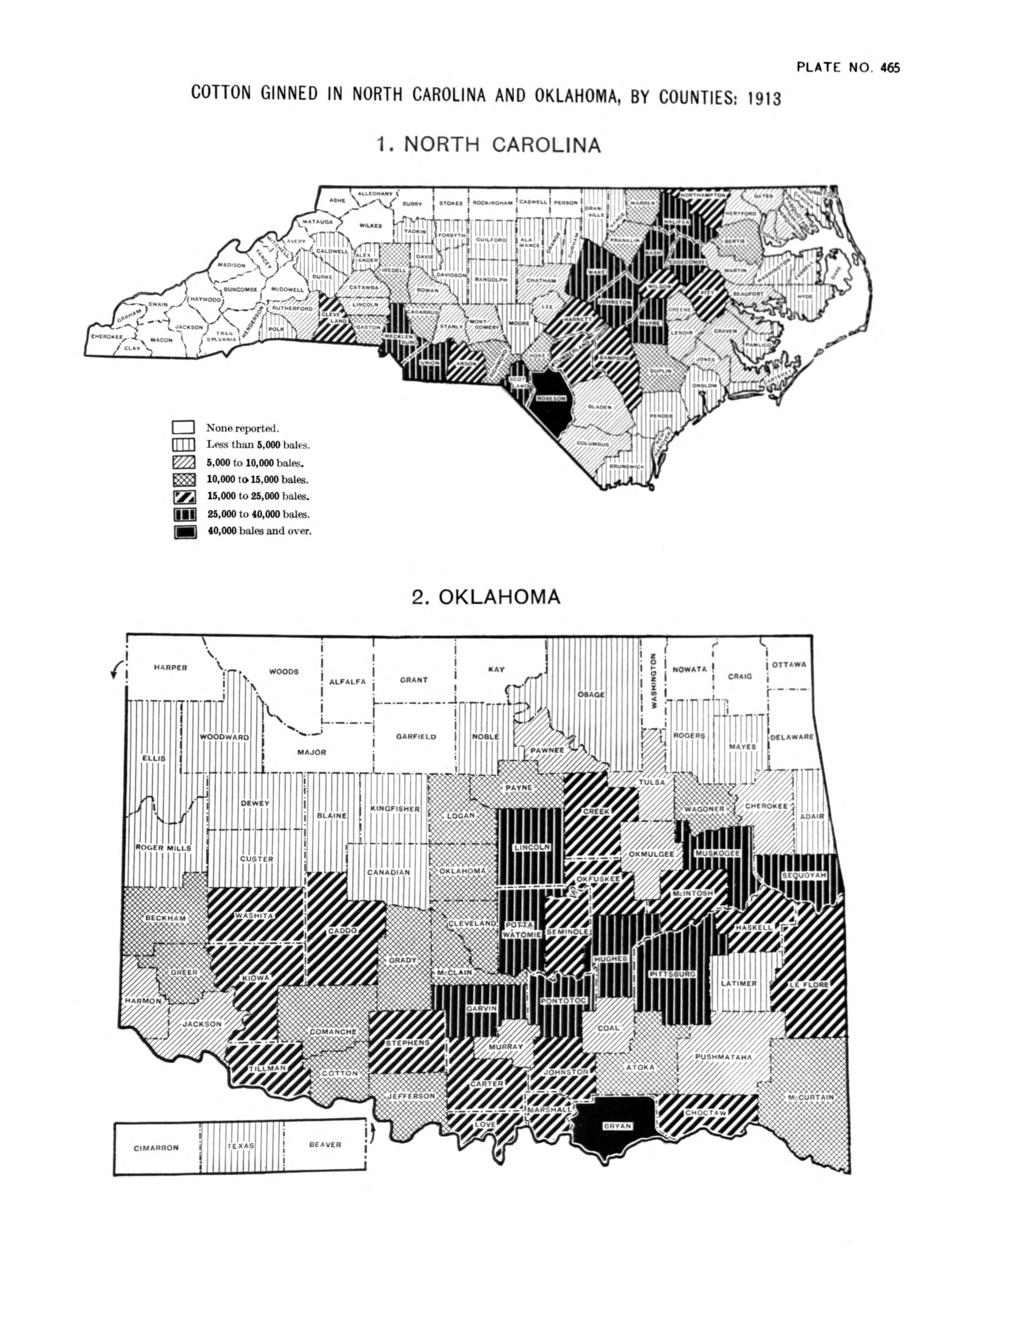 PLATE NO. 465 COTTON GINNED IN NORTH CAROLINA AND OKLAHOMA, BY COUNTIES: 1913 1. NORTH CAROLINA n None reported. r r m Less than 5,000 bales.